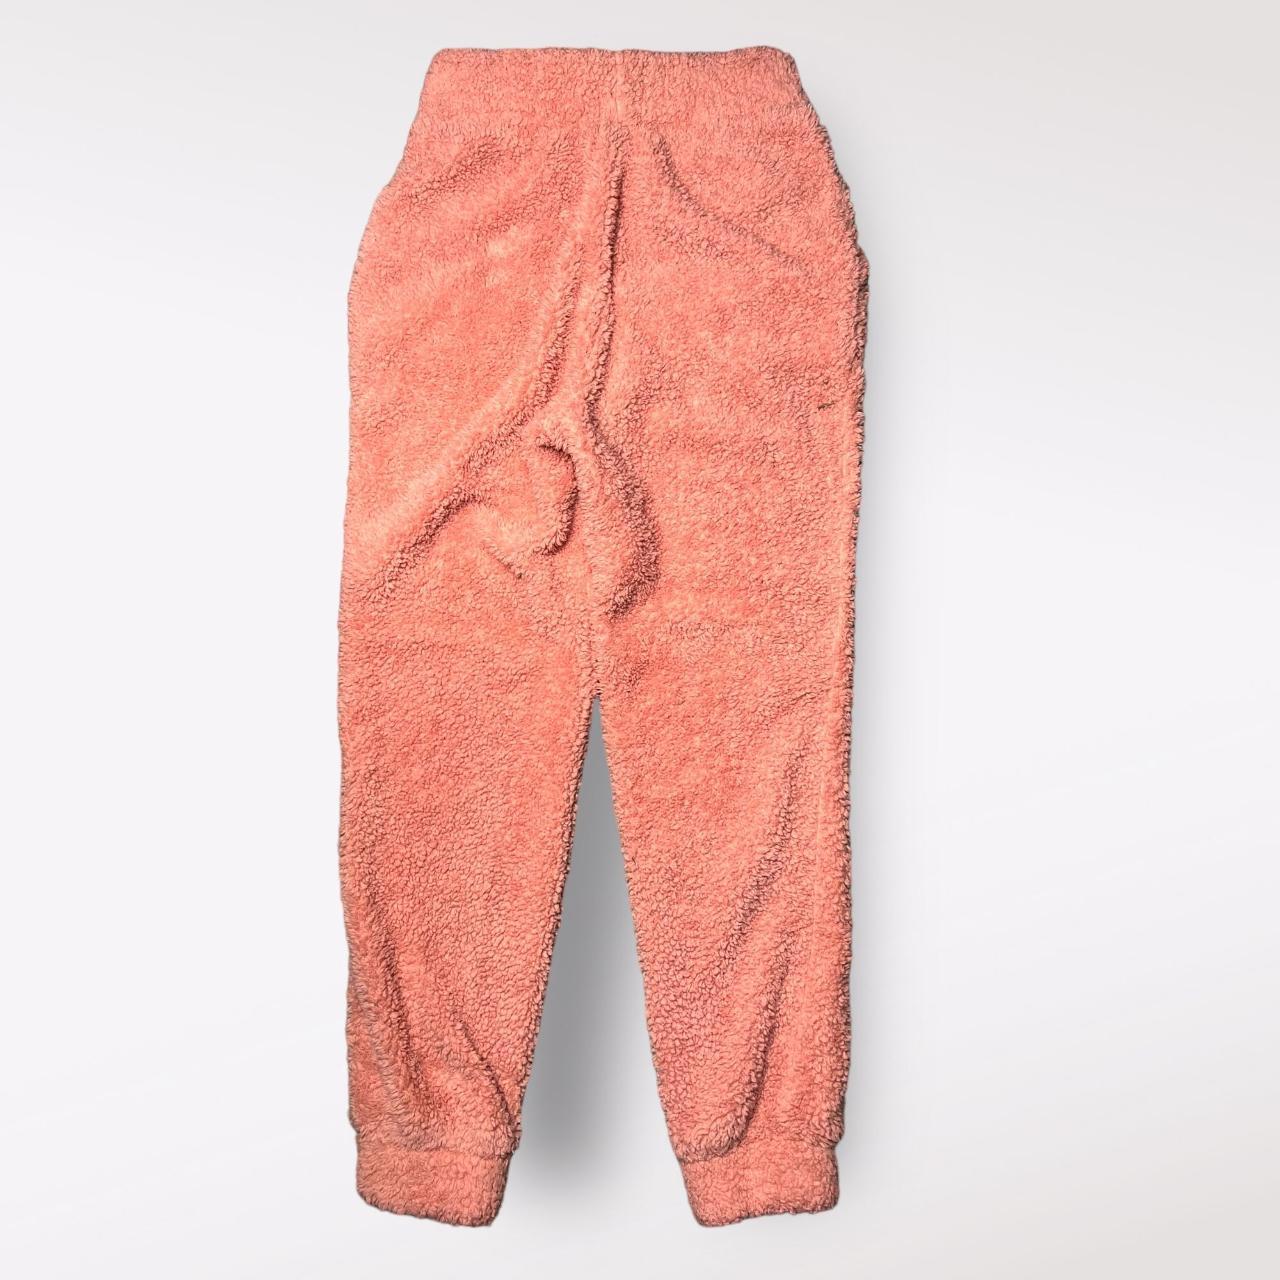 Super soft and cozy plush fleece joggers from No - Depop